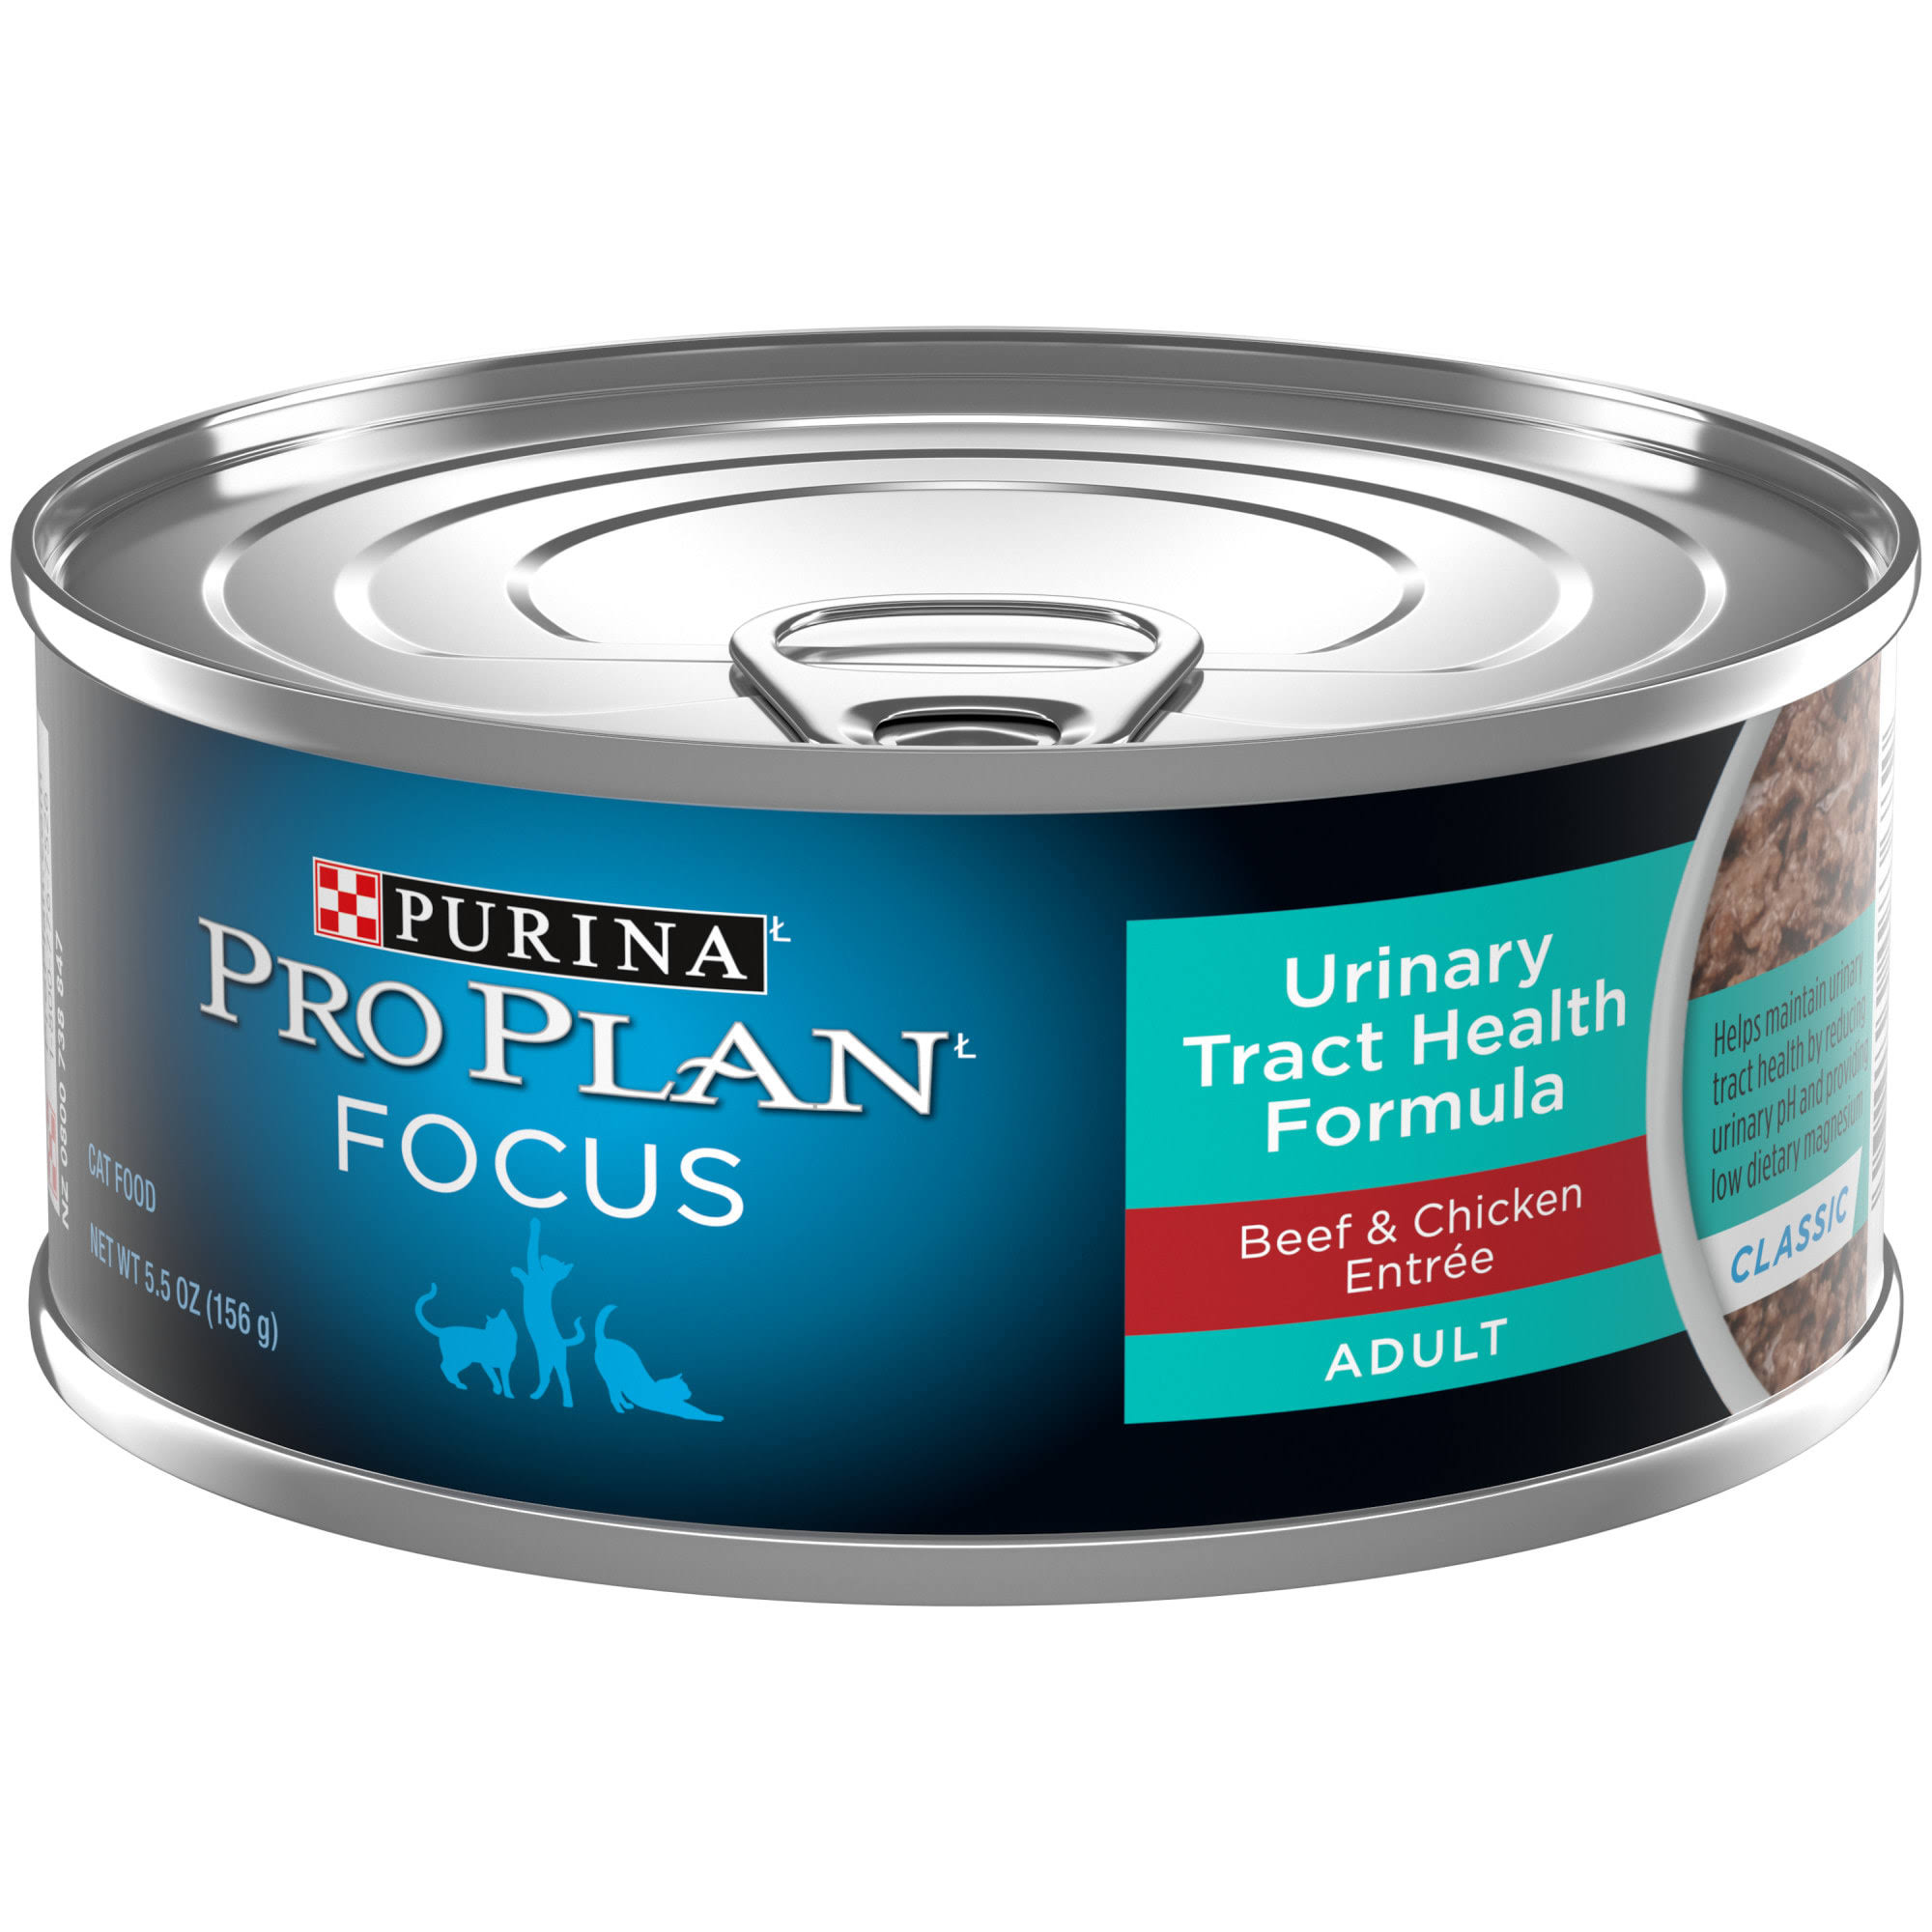 Purina Pro Plan Focus Urinary Tract Health Formula Beef & Chicken Entree Adult Wet Cat Food - 5.5 oz.